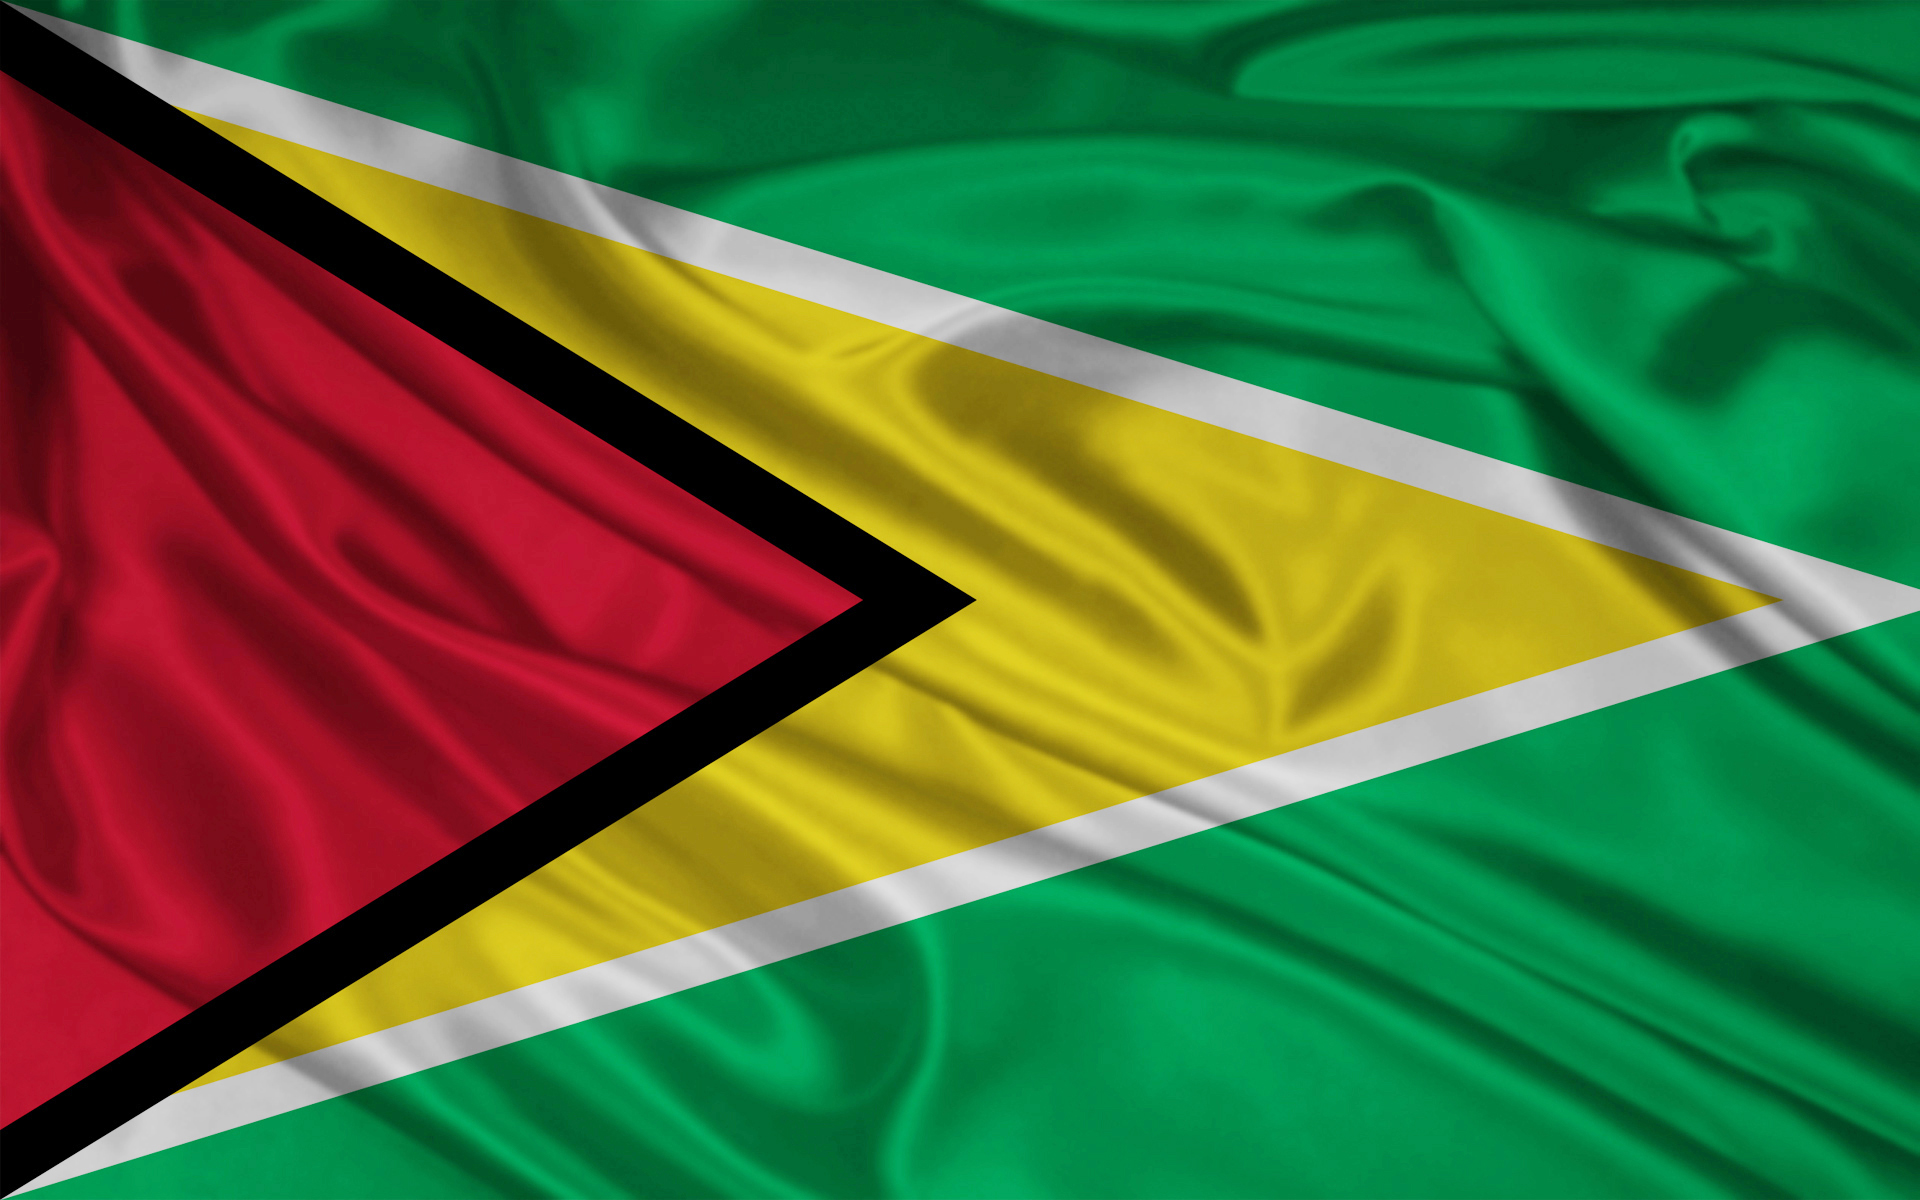 going-to-guyana-a-community-crowdfunding-project-in-pendeen-by